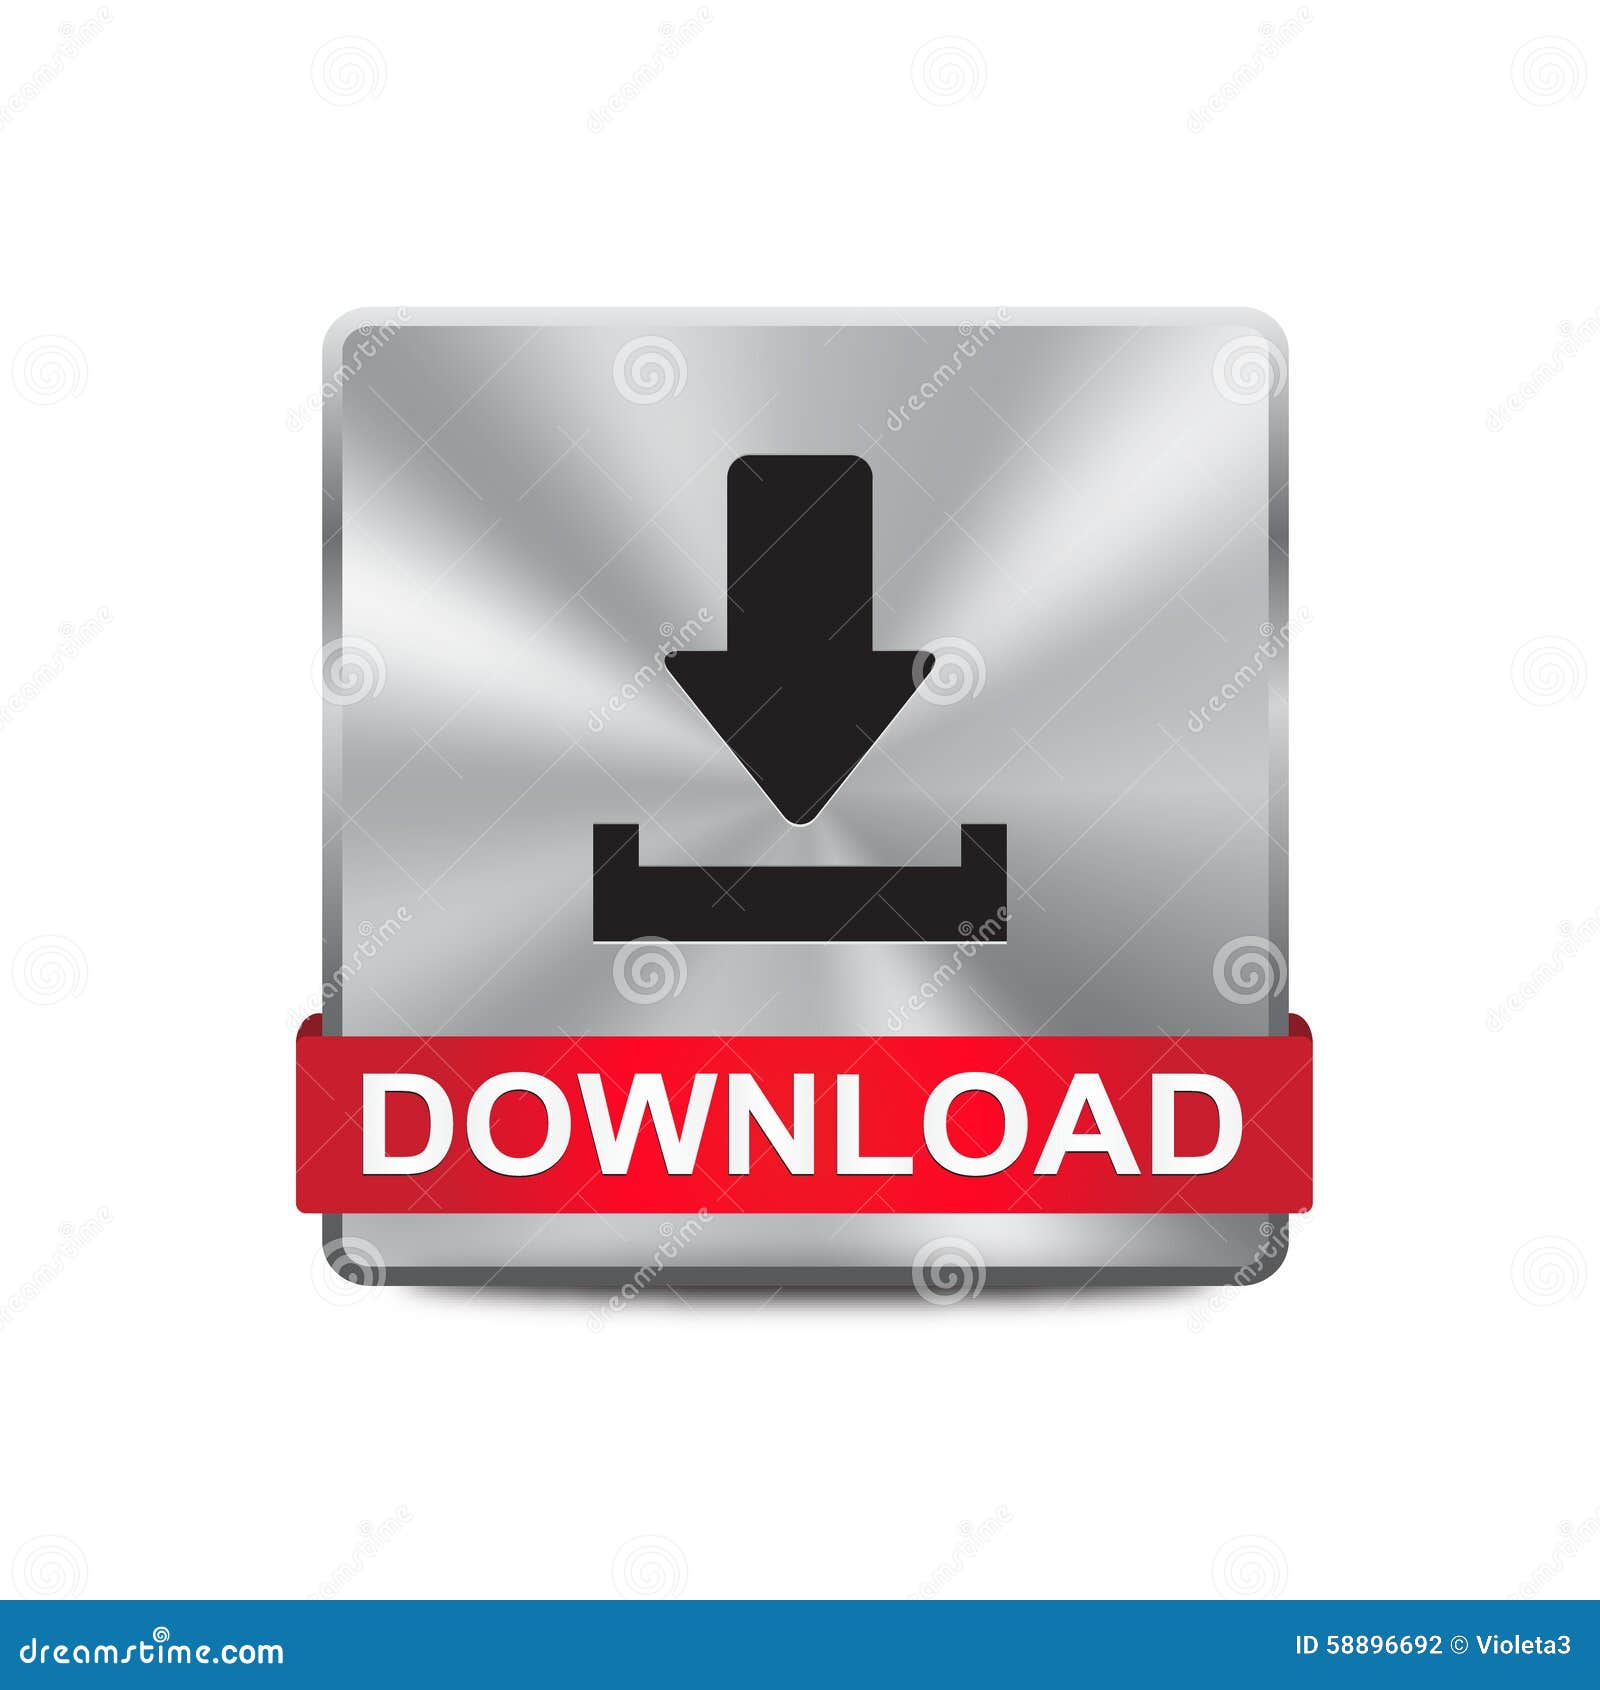 download labview based advanced instrumentation systems